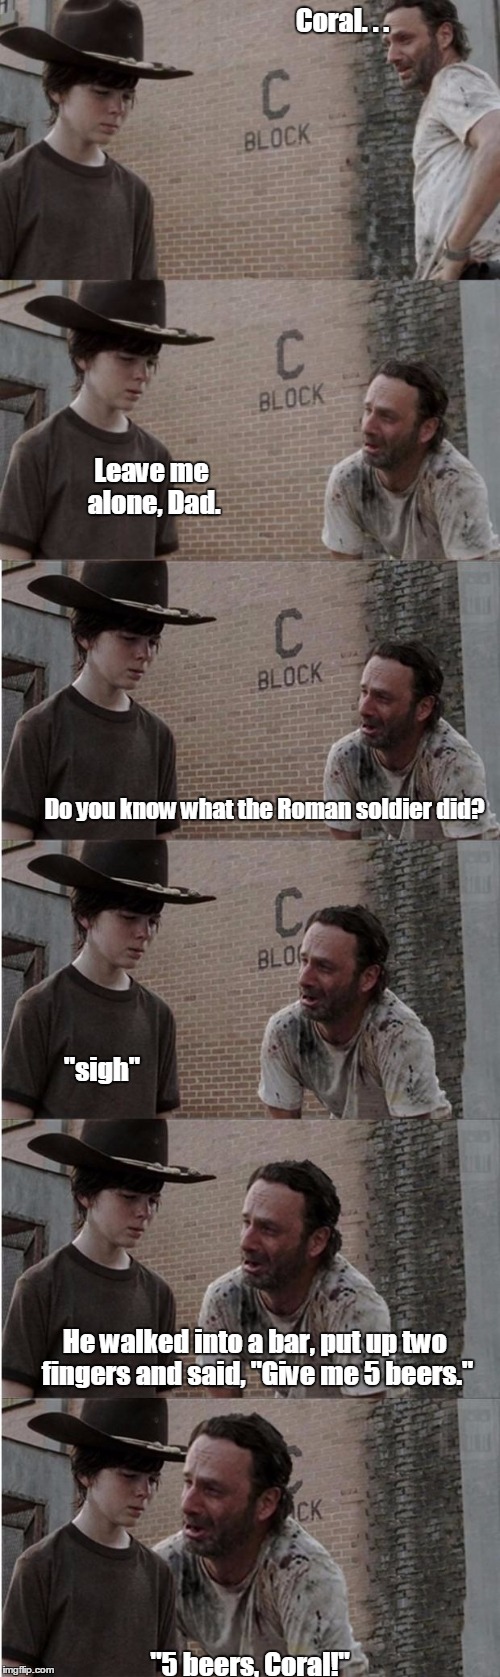 Rick and Carl Longer Meme | Coral. . . "5 beers, Coral!" Leave me alone, Dad. Do you know what the Roman soldier did? "sigh" He walked into a bar, put up two fingers an | image tagged in memes,rick and carl longer | made w/ Imgflip meme maker